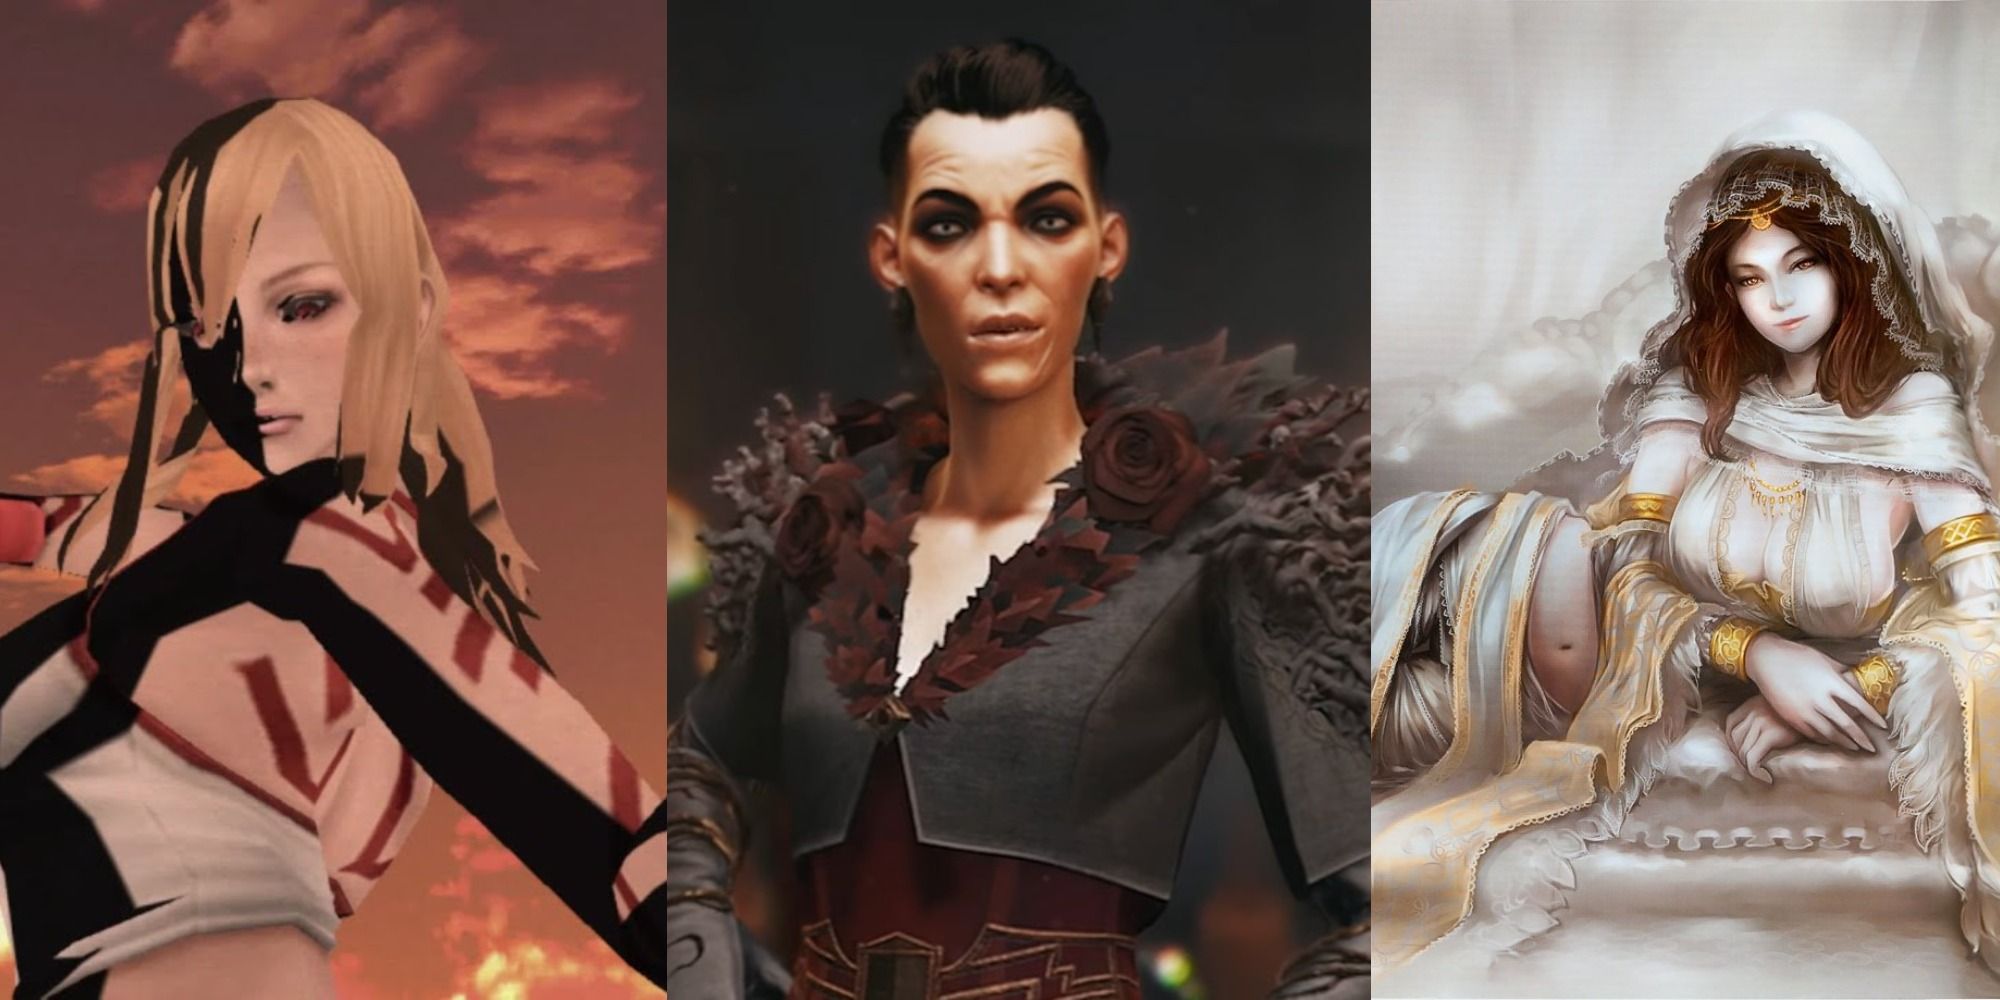 Worst Sisters in Gaming Split Featured Jeane from No More Heroes, Delilah from Dishonored, Gwynevere Dark Souls